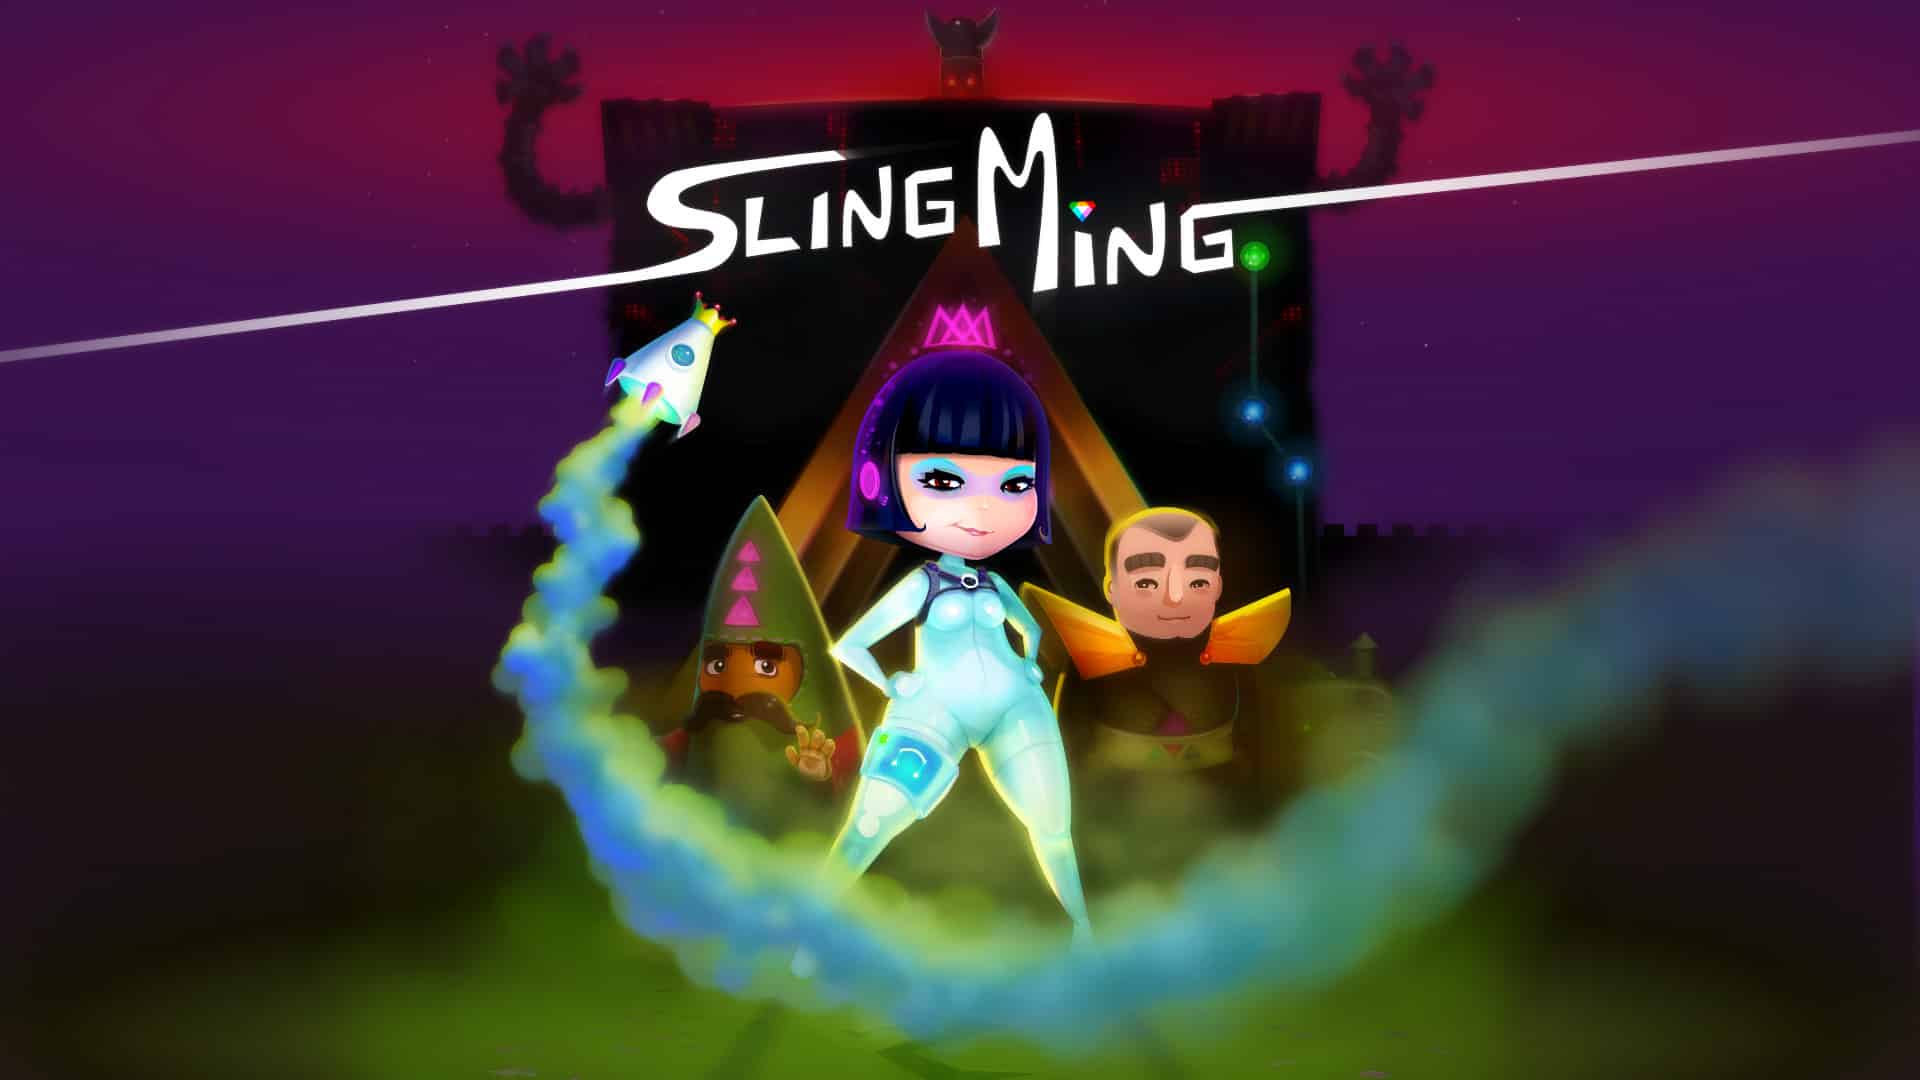 Sling Ming player count stats